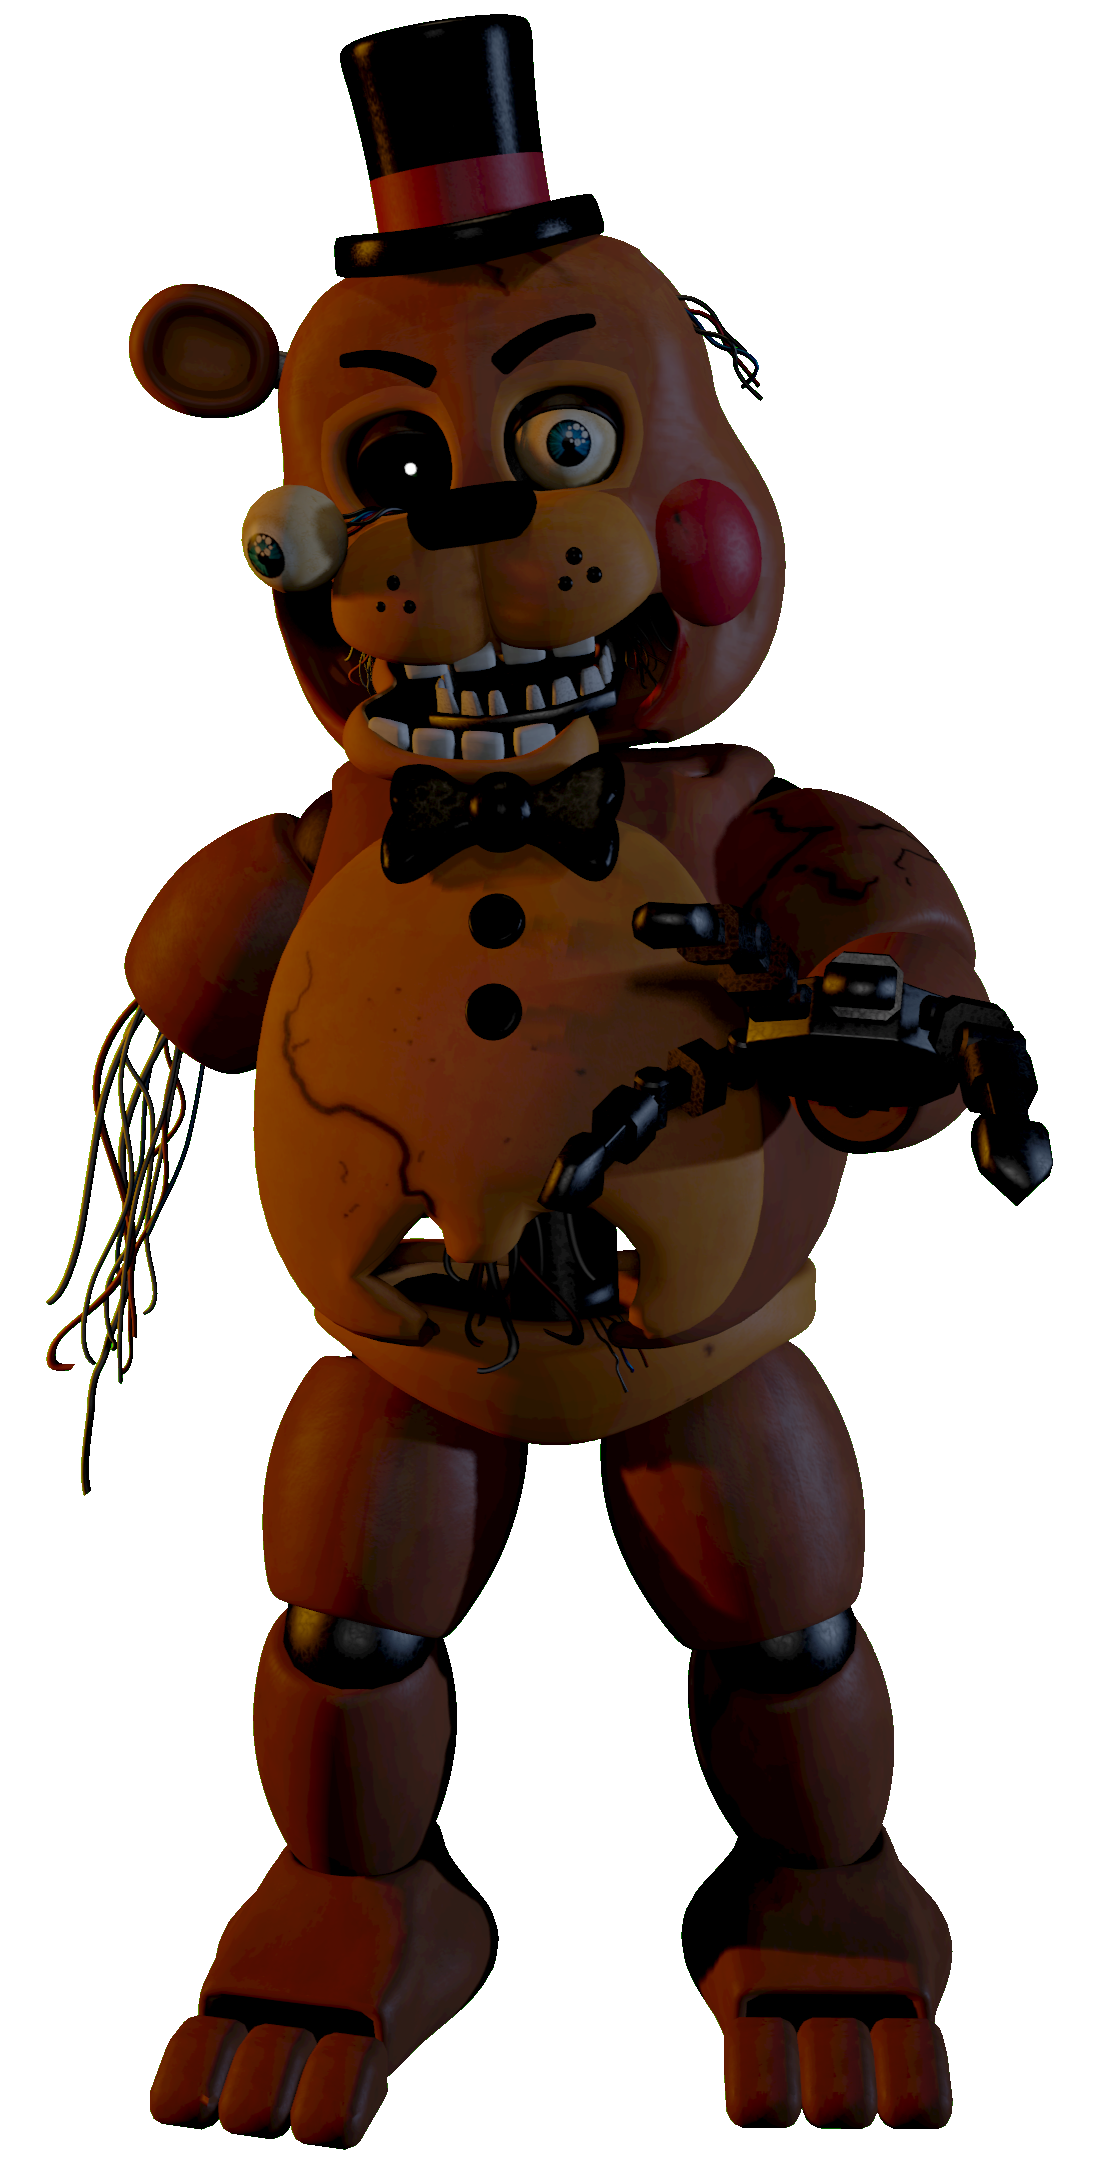 Freddy Plush by toasted912 on DeviantArt